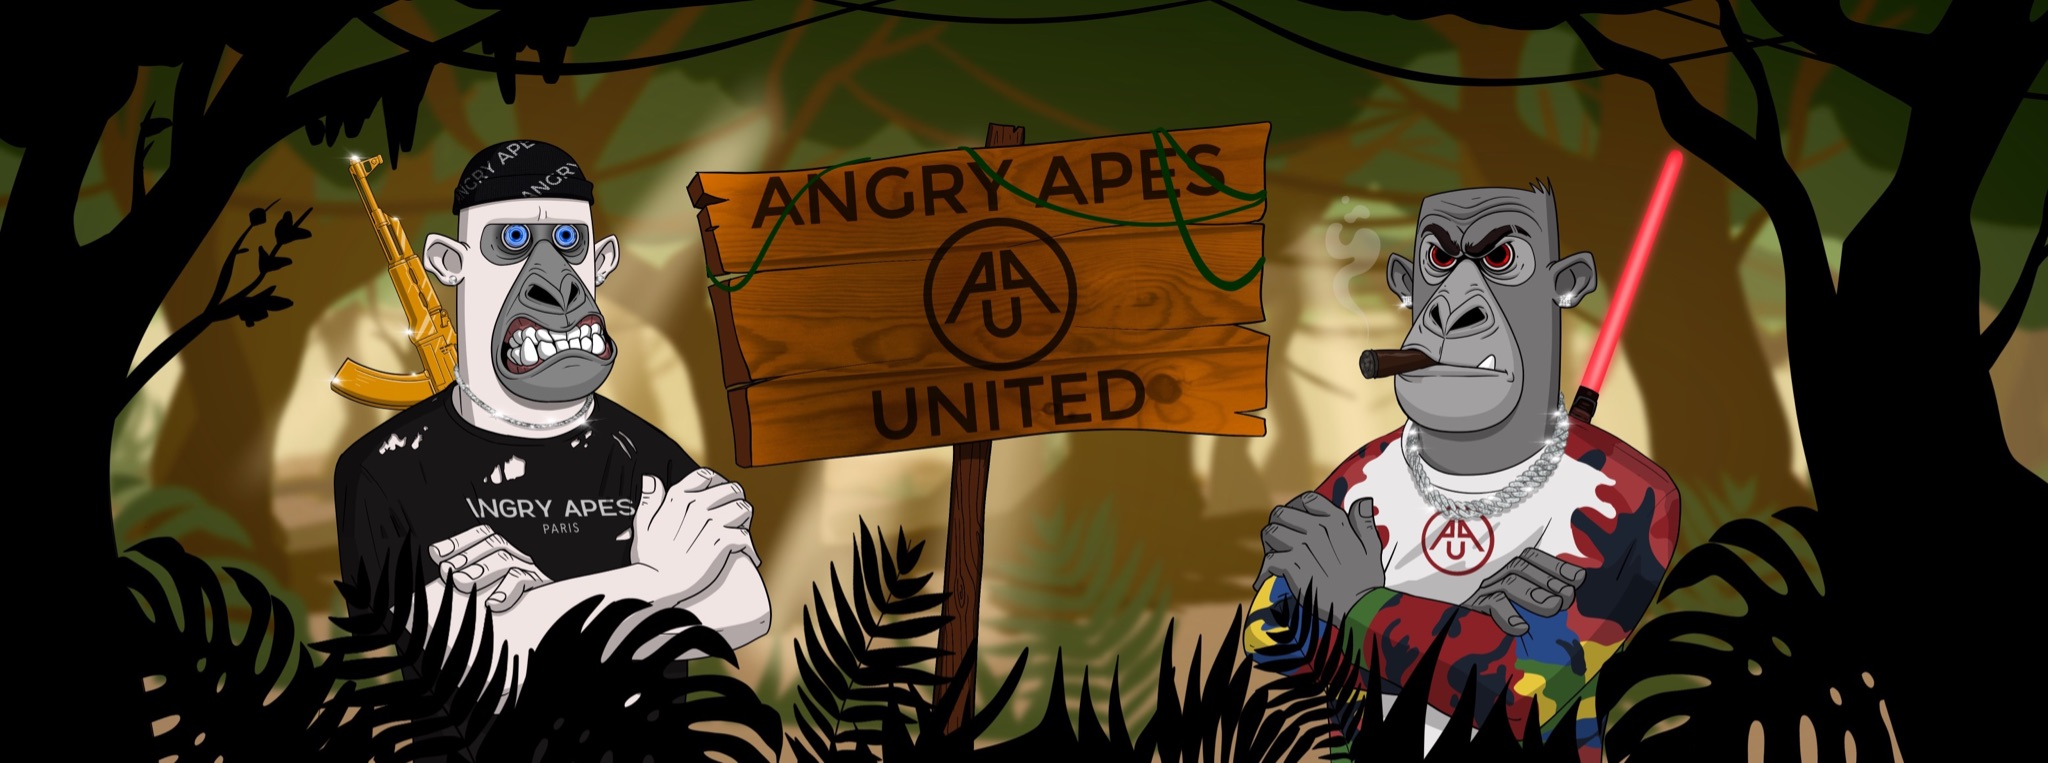 Angry Apes United Is Launching an NFT Project That’ll Allow Holders to Earn Additional Crypto Assets Through Blockchain Gaming